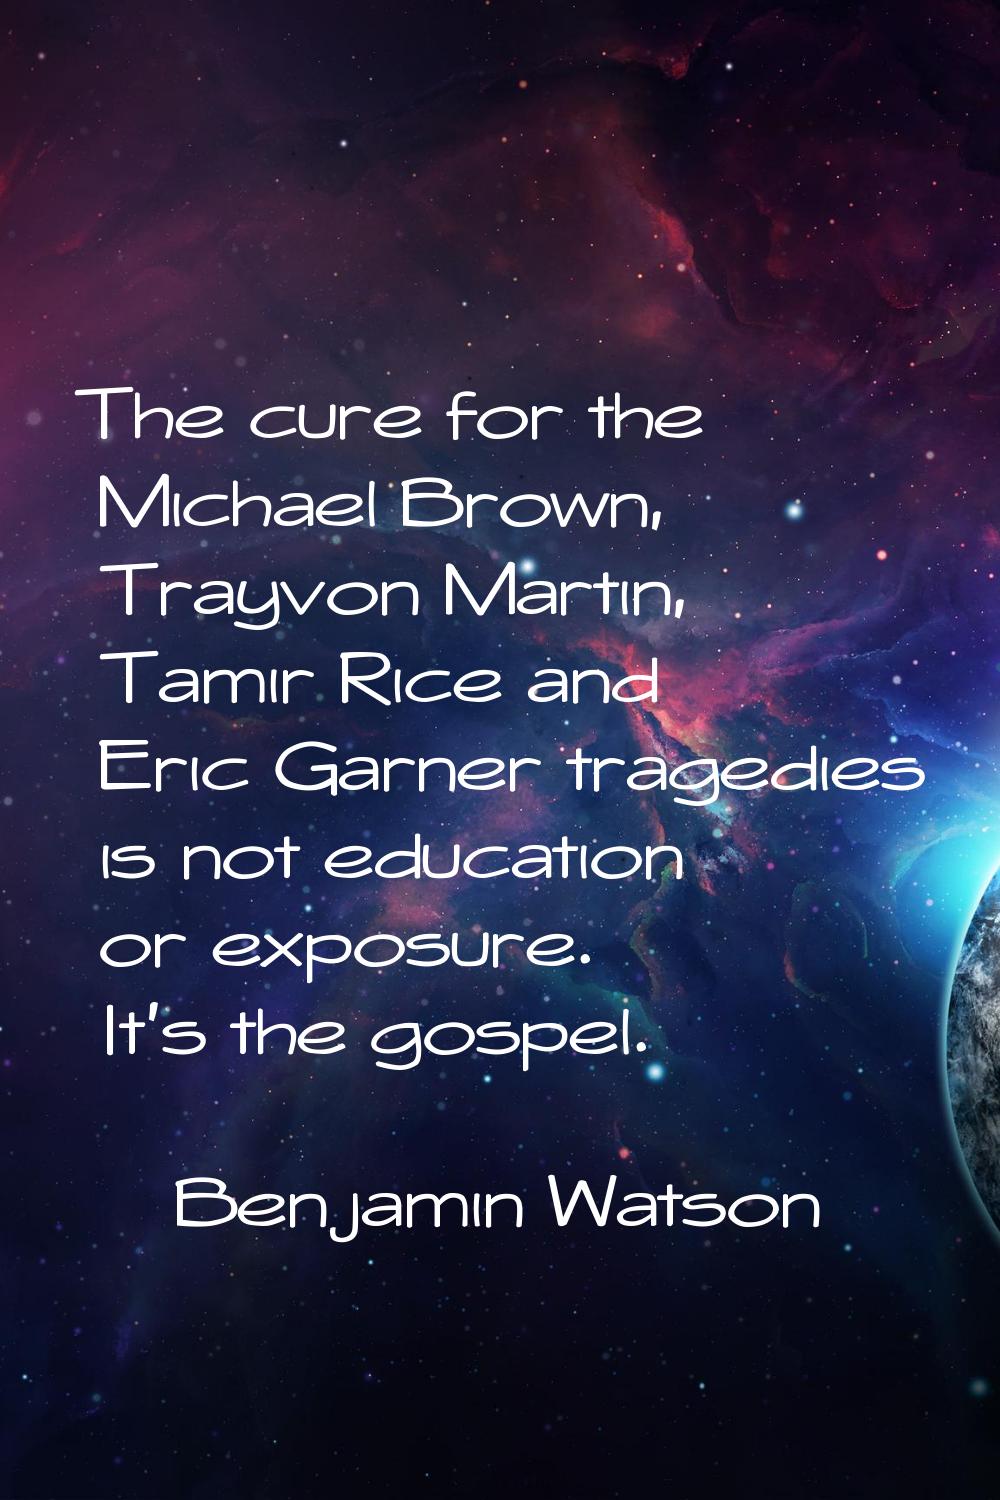 The cure for the Michael Brown, Trayvon Martin, Tamir Rice and Eric Garner tragedies is not educati